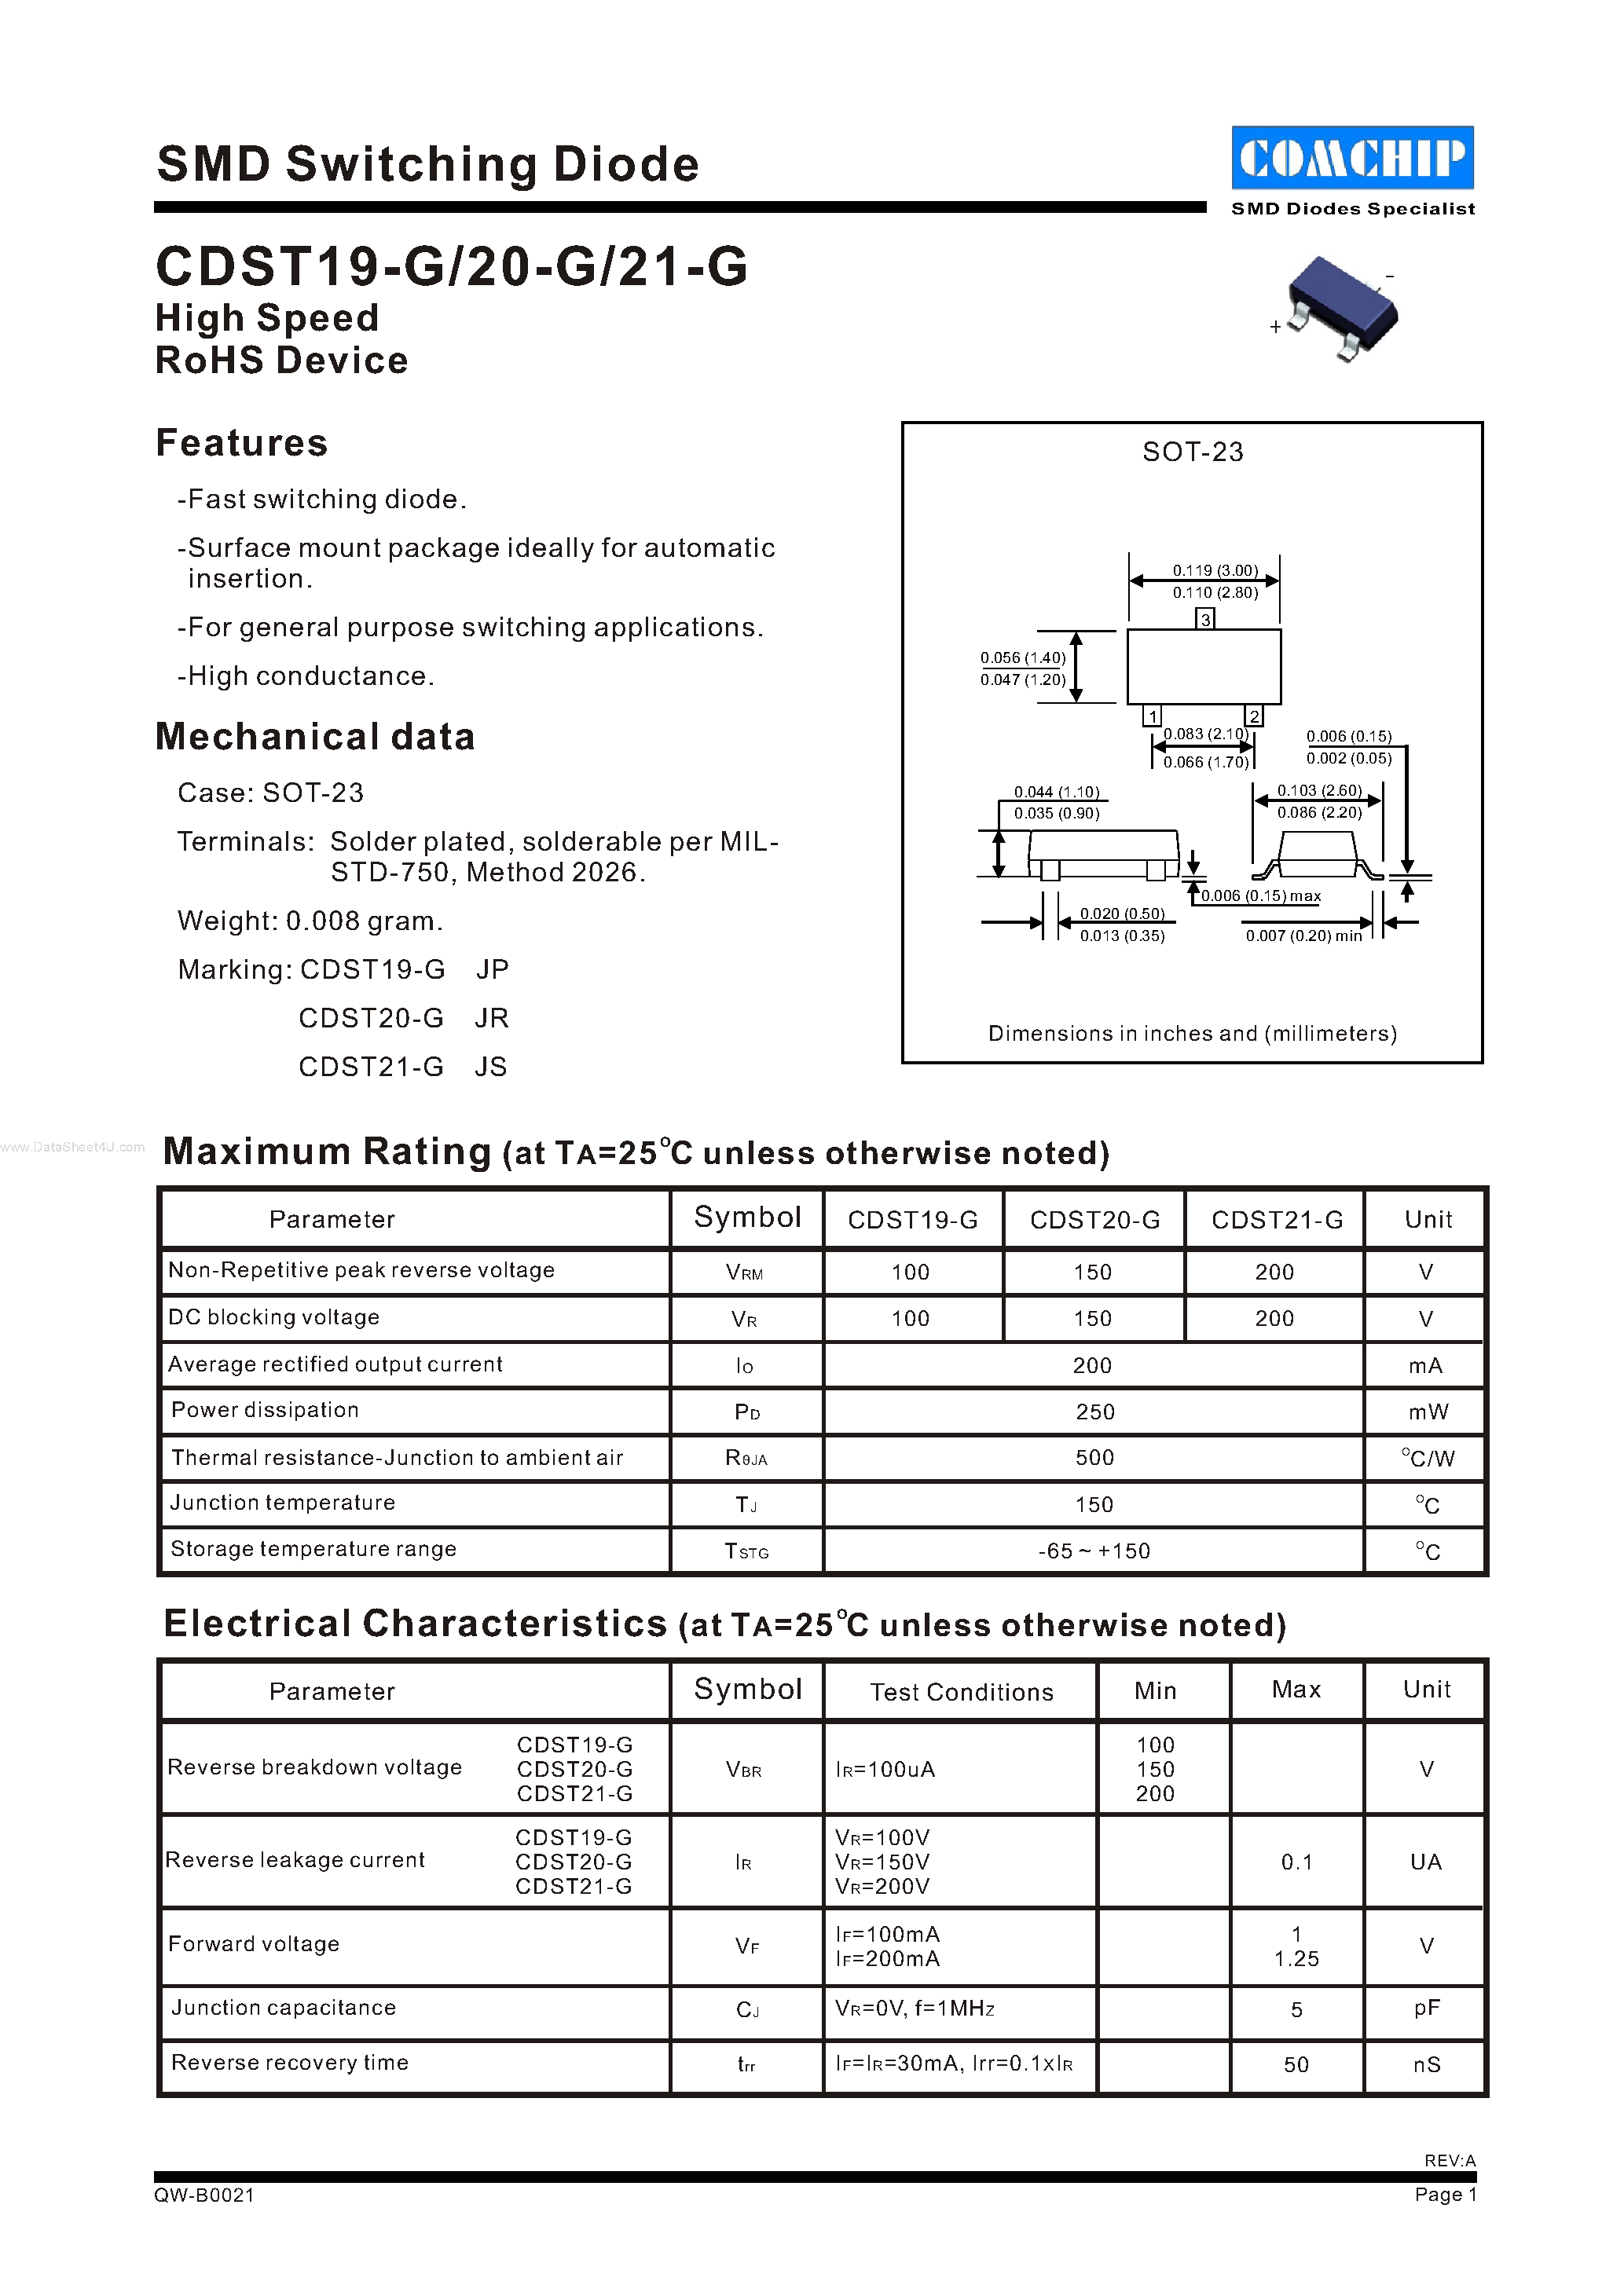 Datasheet CDST19-G - (CDST19-G - CDST21-G) SMD Switching Diode page 1